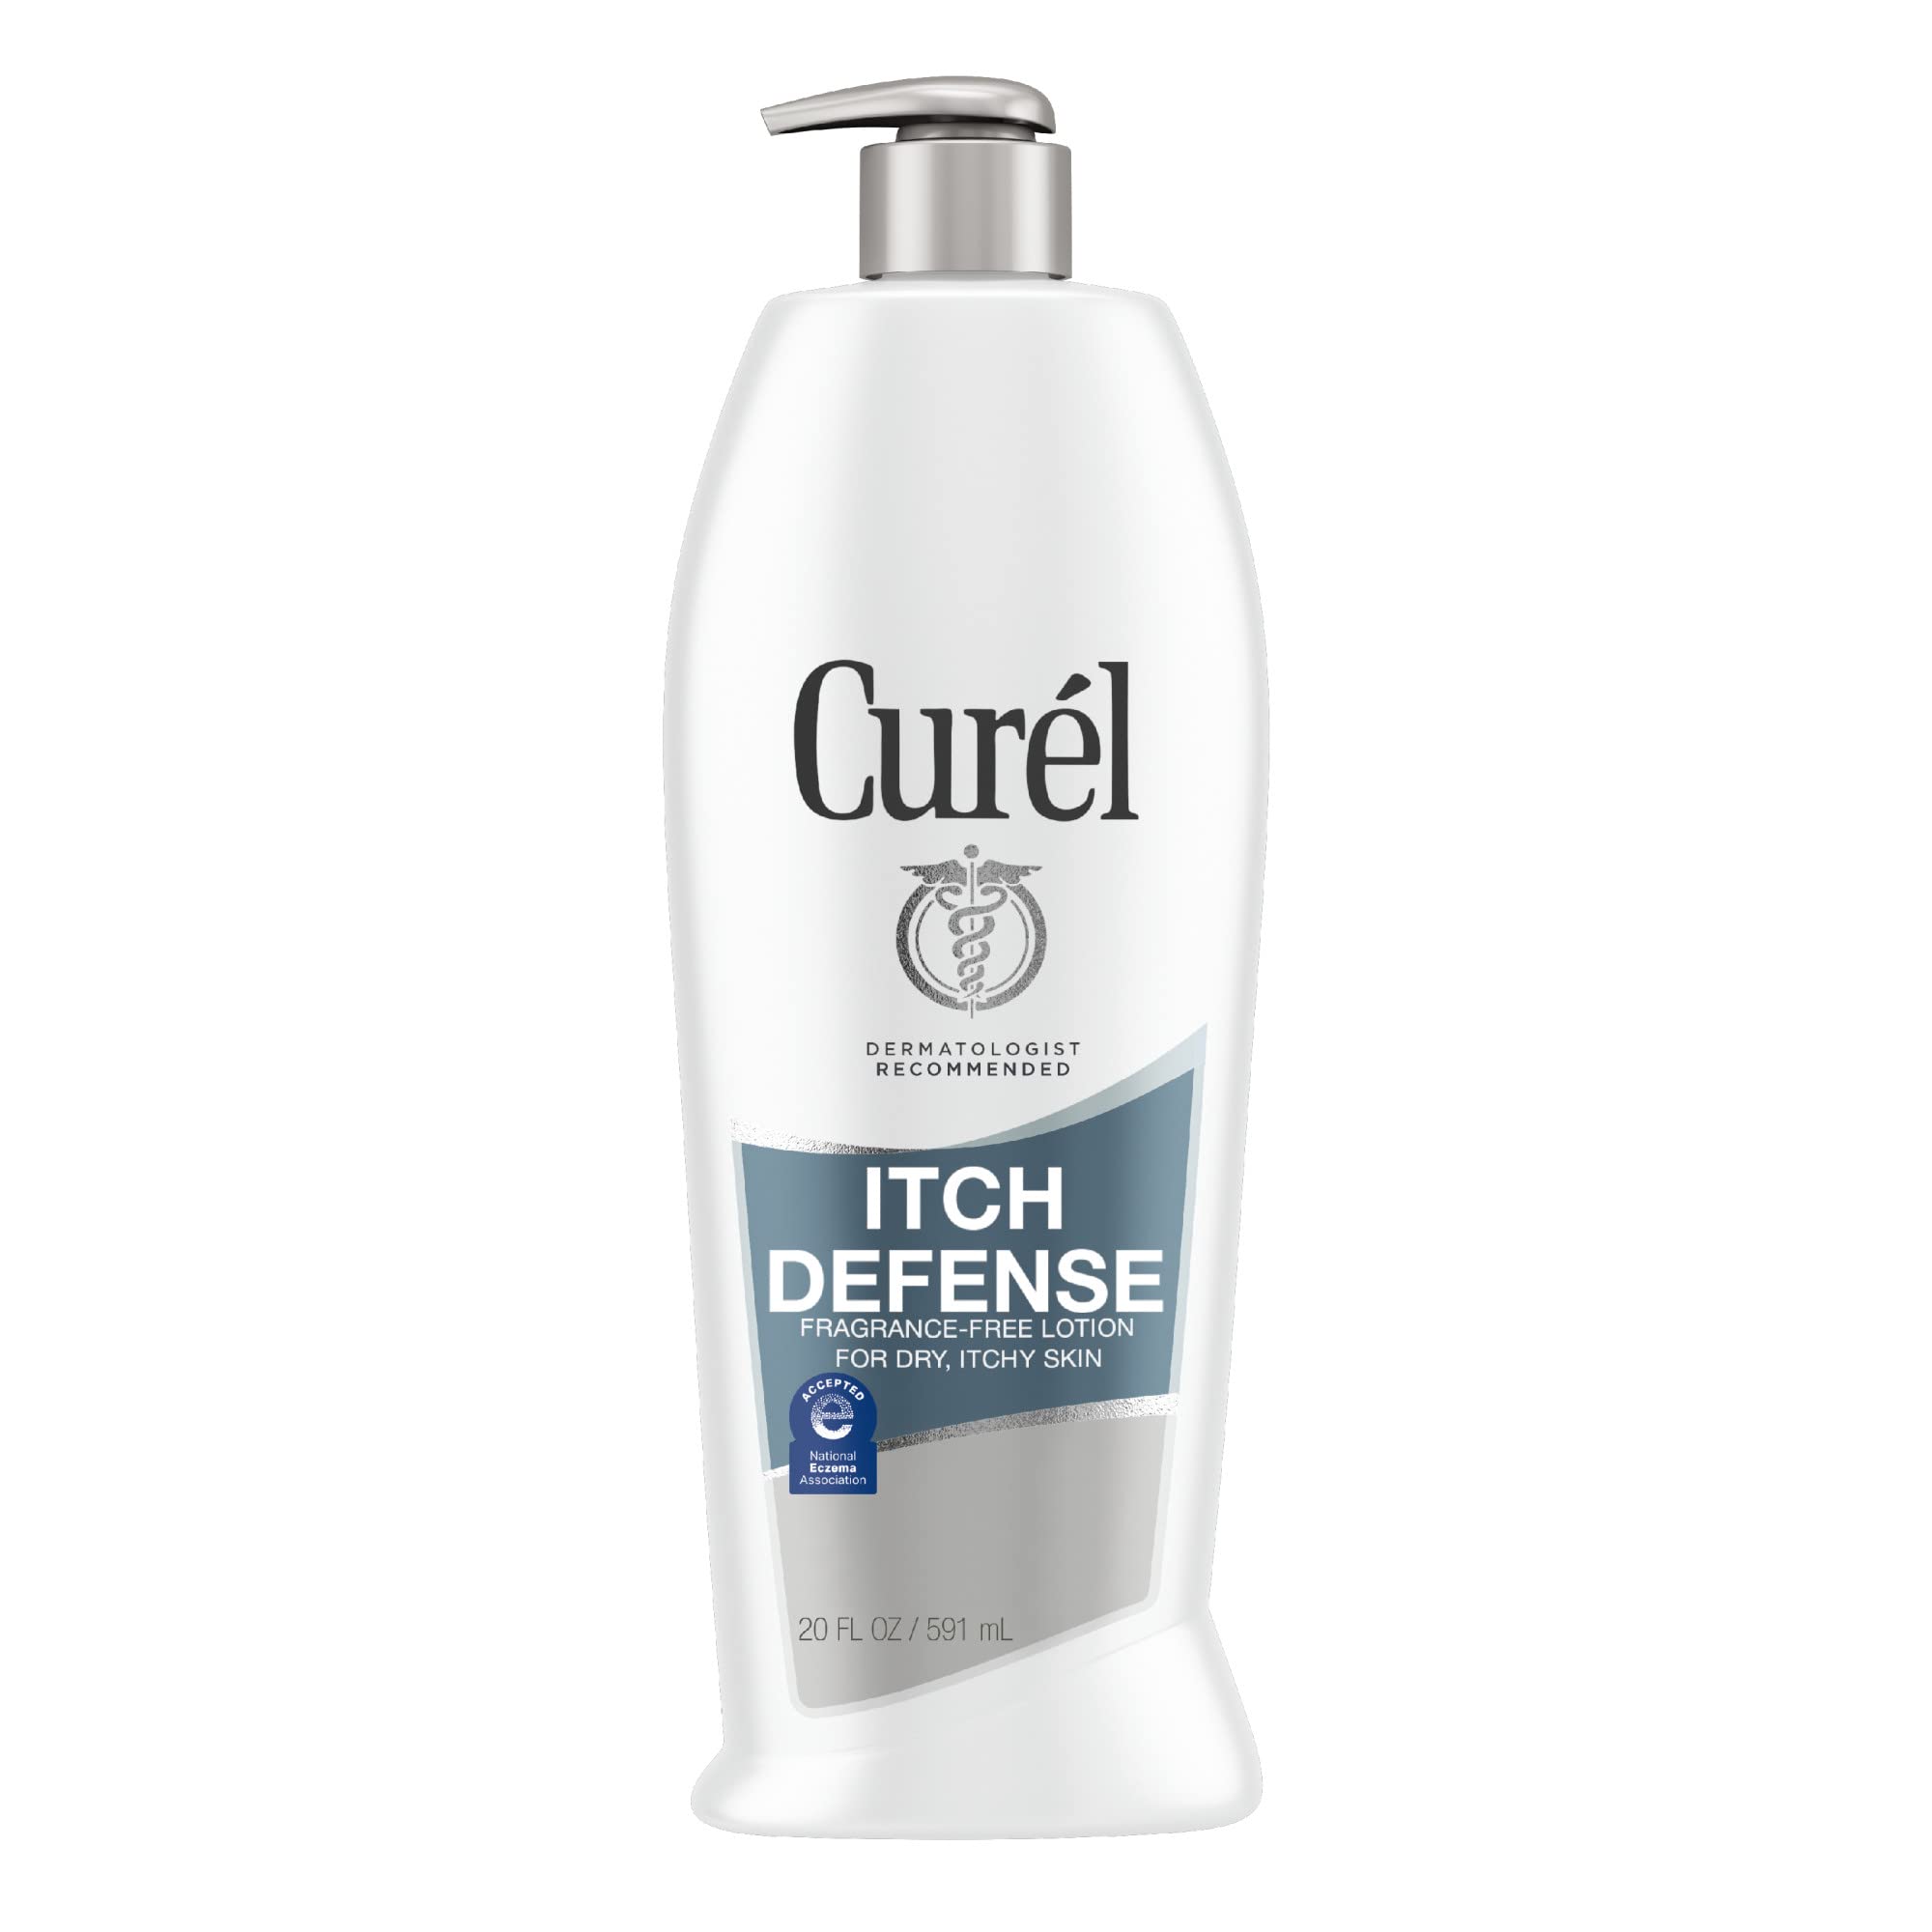 Curél Itch Defense Calming Body Lotion, Moisturizer for Dry, Itchy Skin, Body and Hand Lotion, with Advanced Ceramide Complex, Pro-Vitamin B5, Shea Butter, 20 Ounce, white